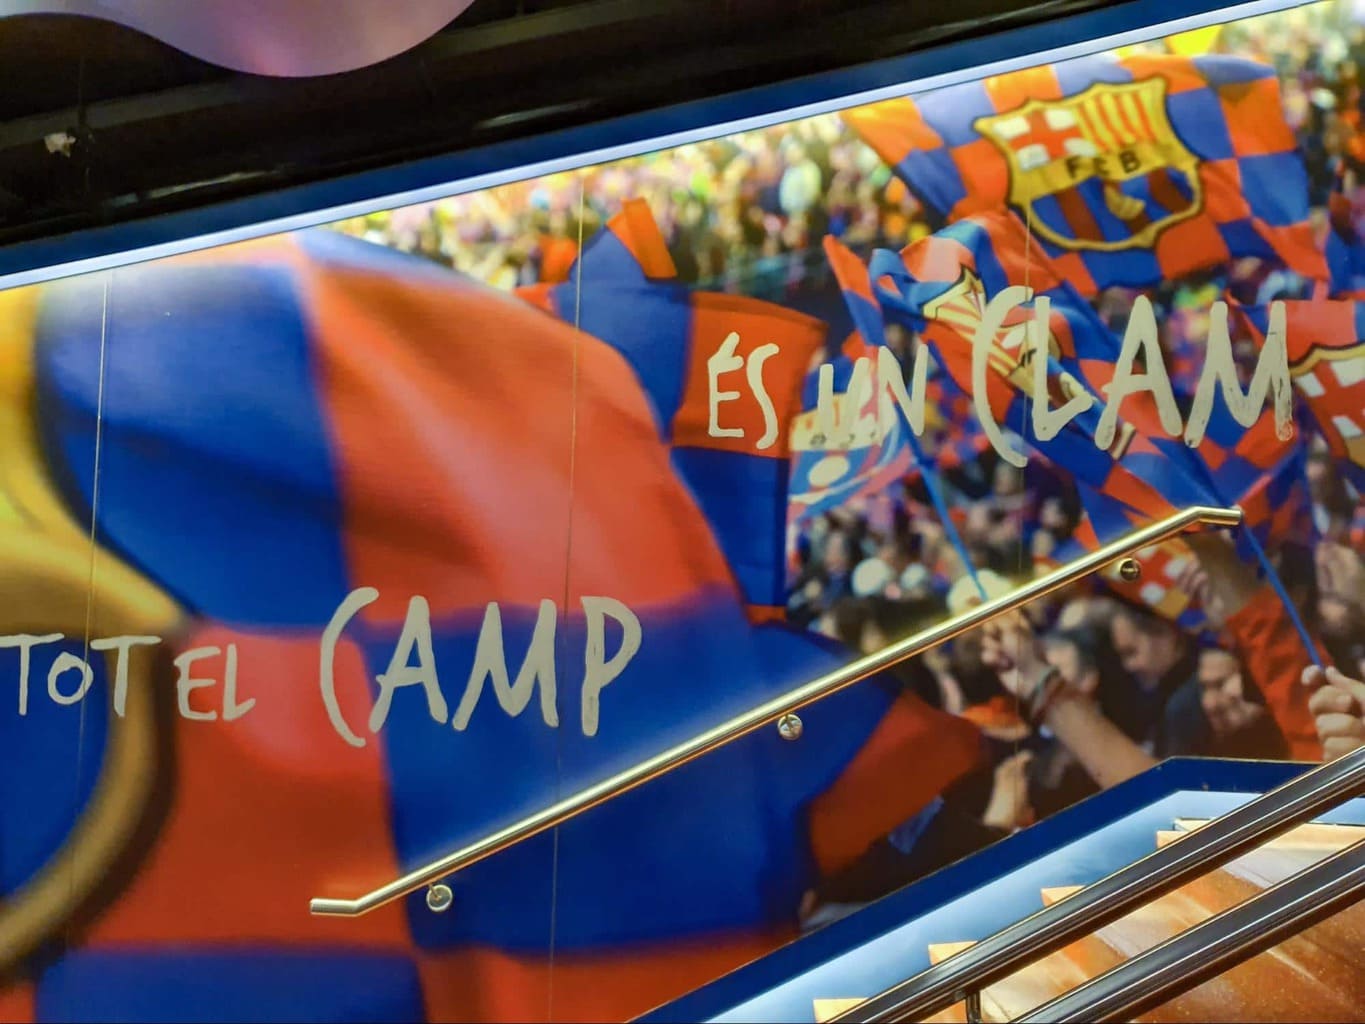 Barça’s anthem written on the walls of the player’s tunnel